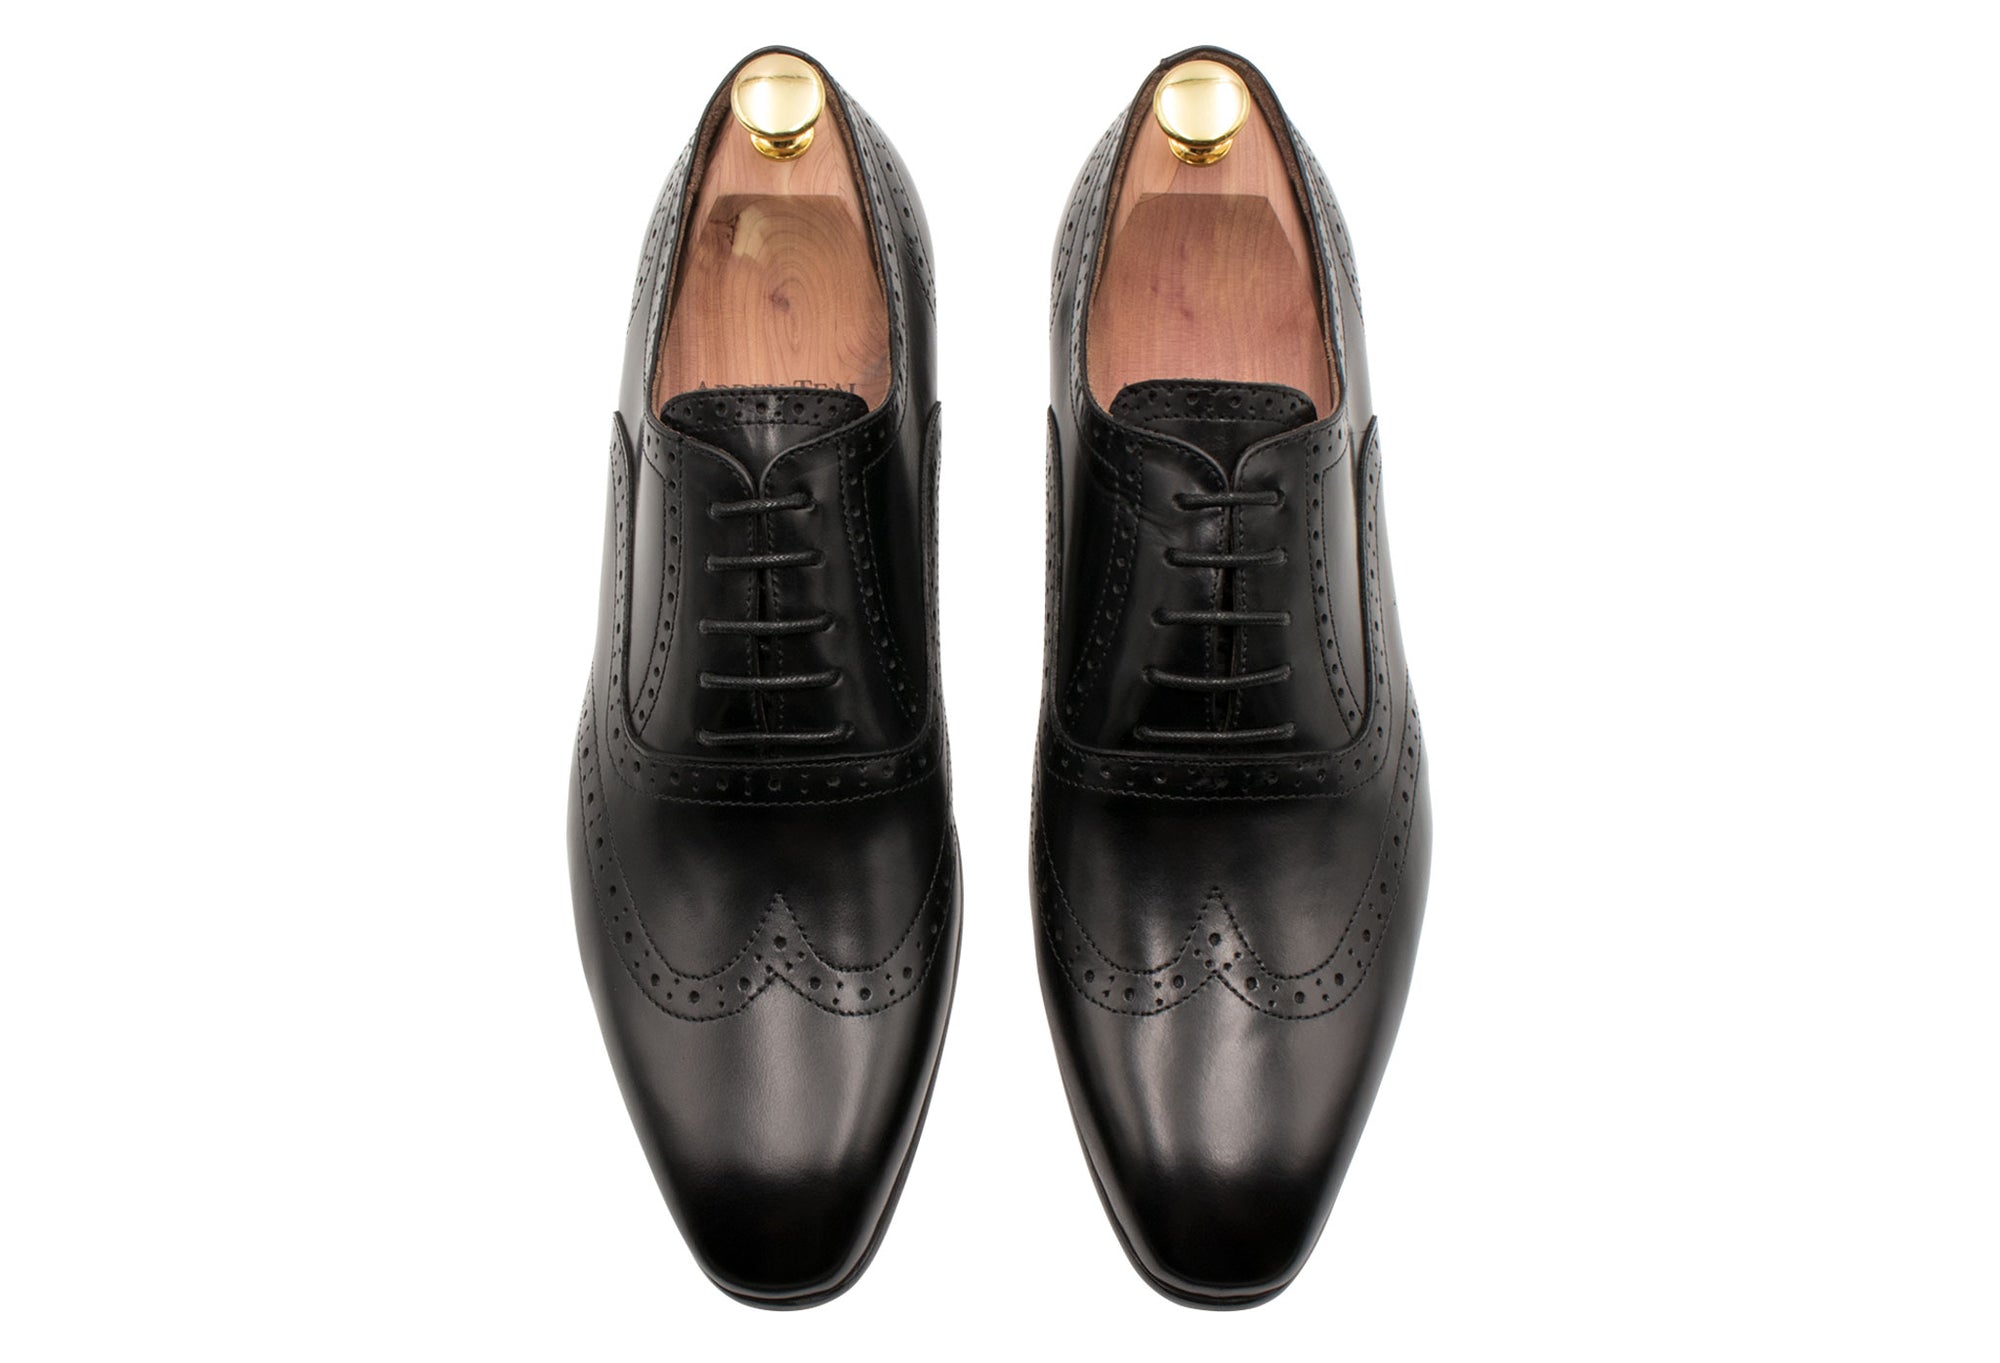 Rosario Wingtip Black Oxford Leather Shoes